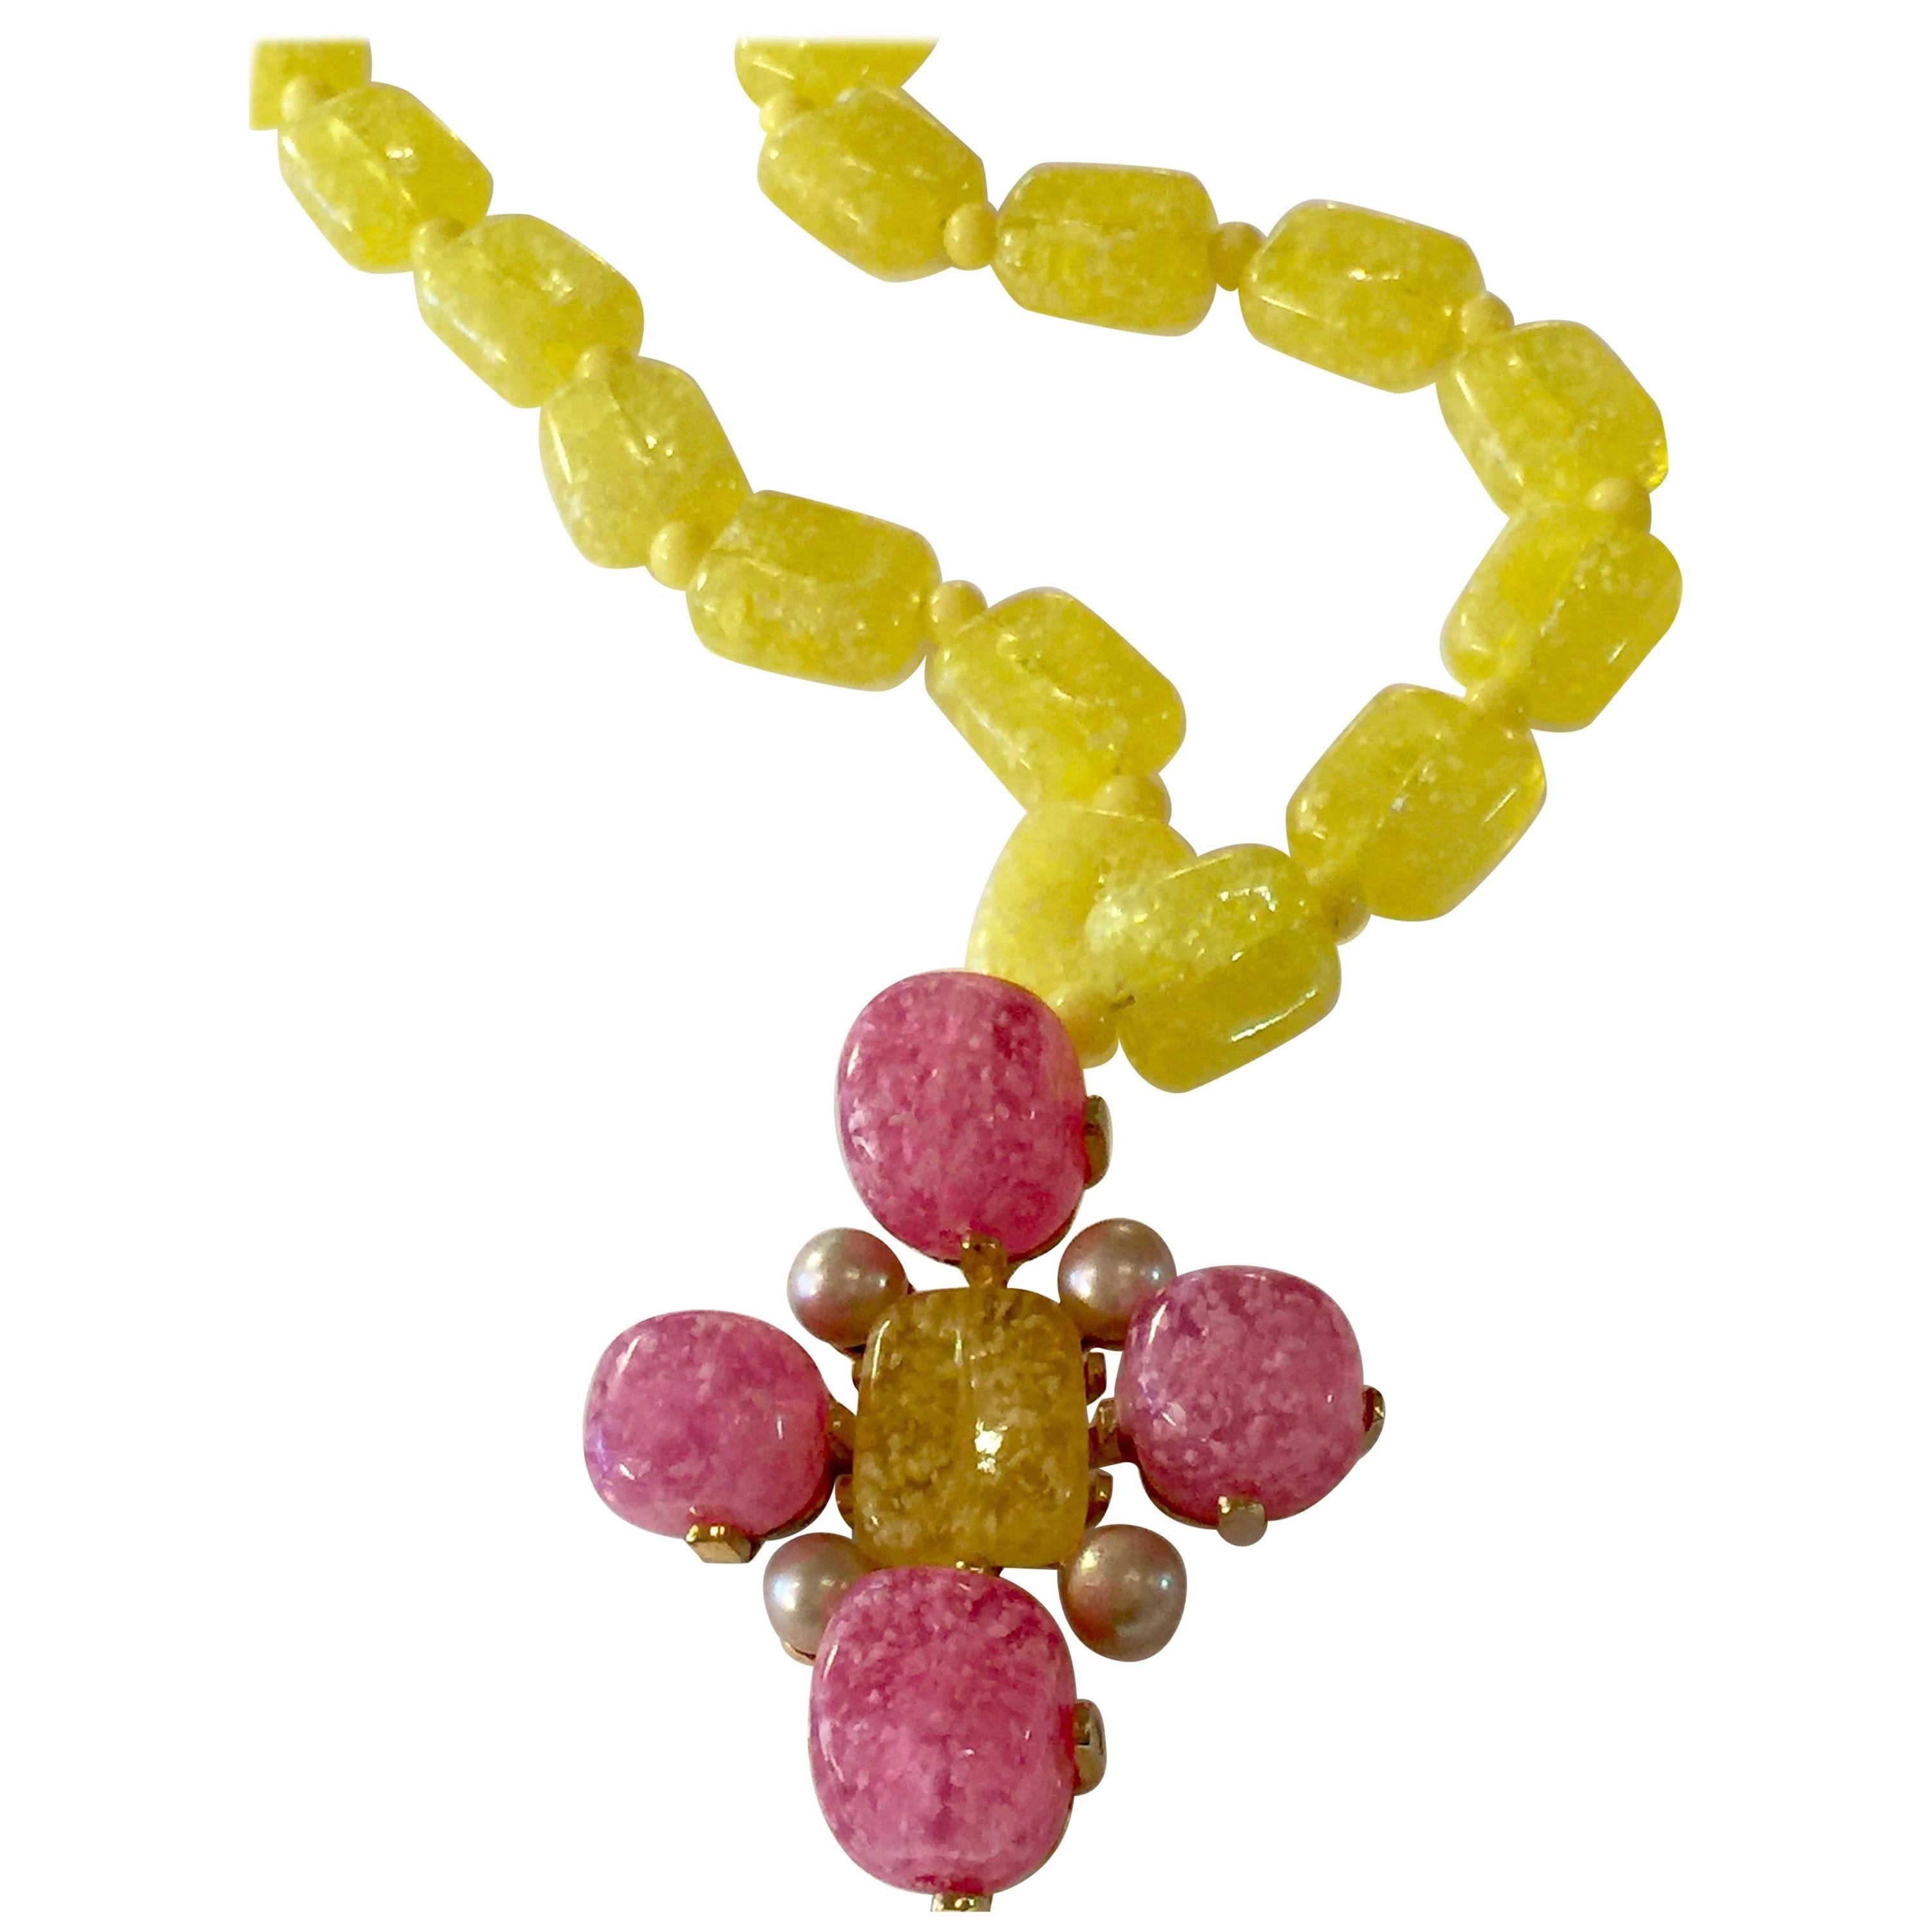  Vrba for Castlecliff Yellow and Pink Composite Resin Pendant Necklace 